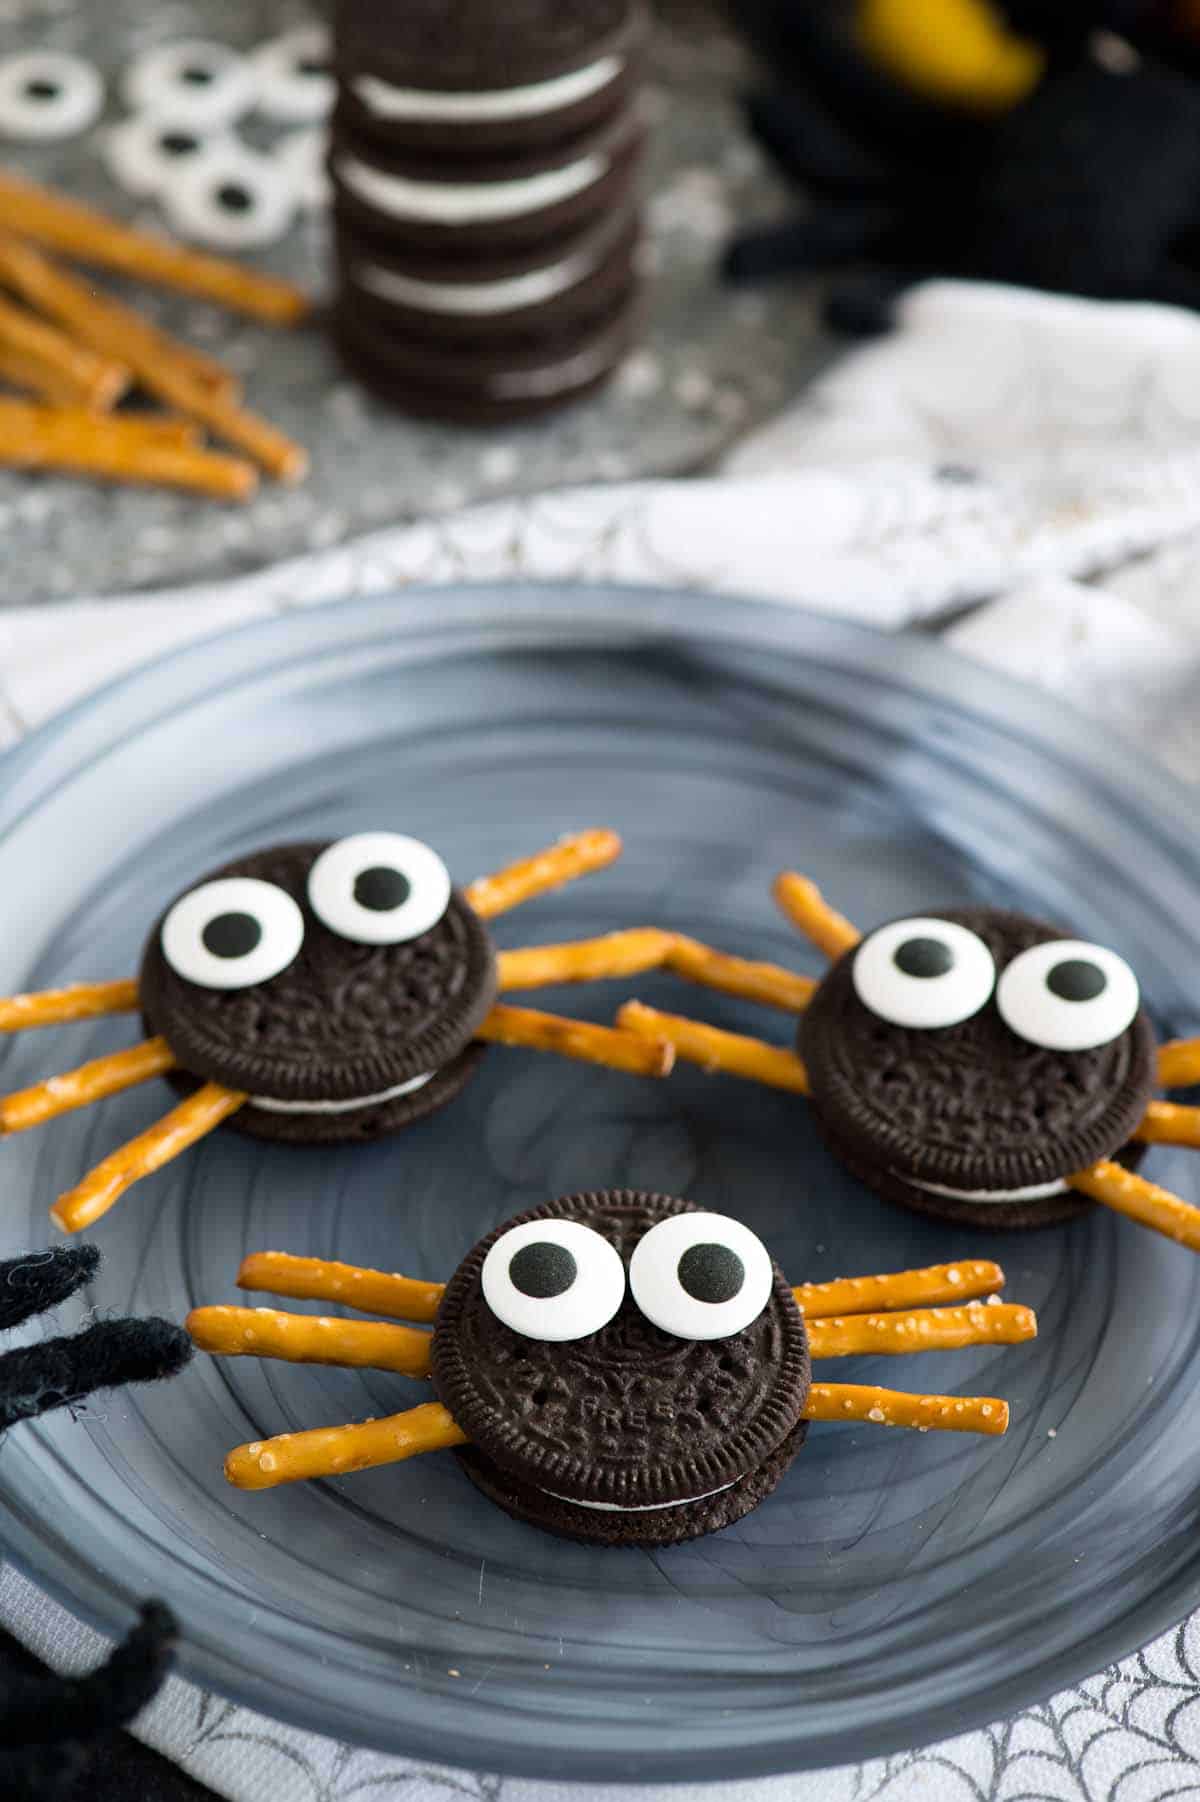 oreo spider cookies on plate with stack of oreo cookies in background